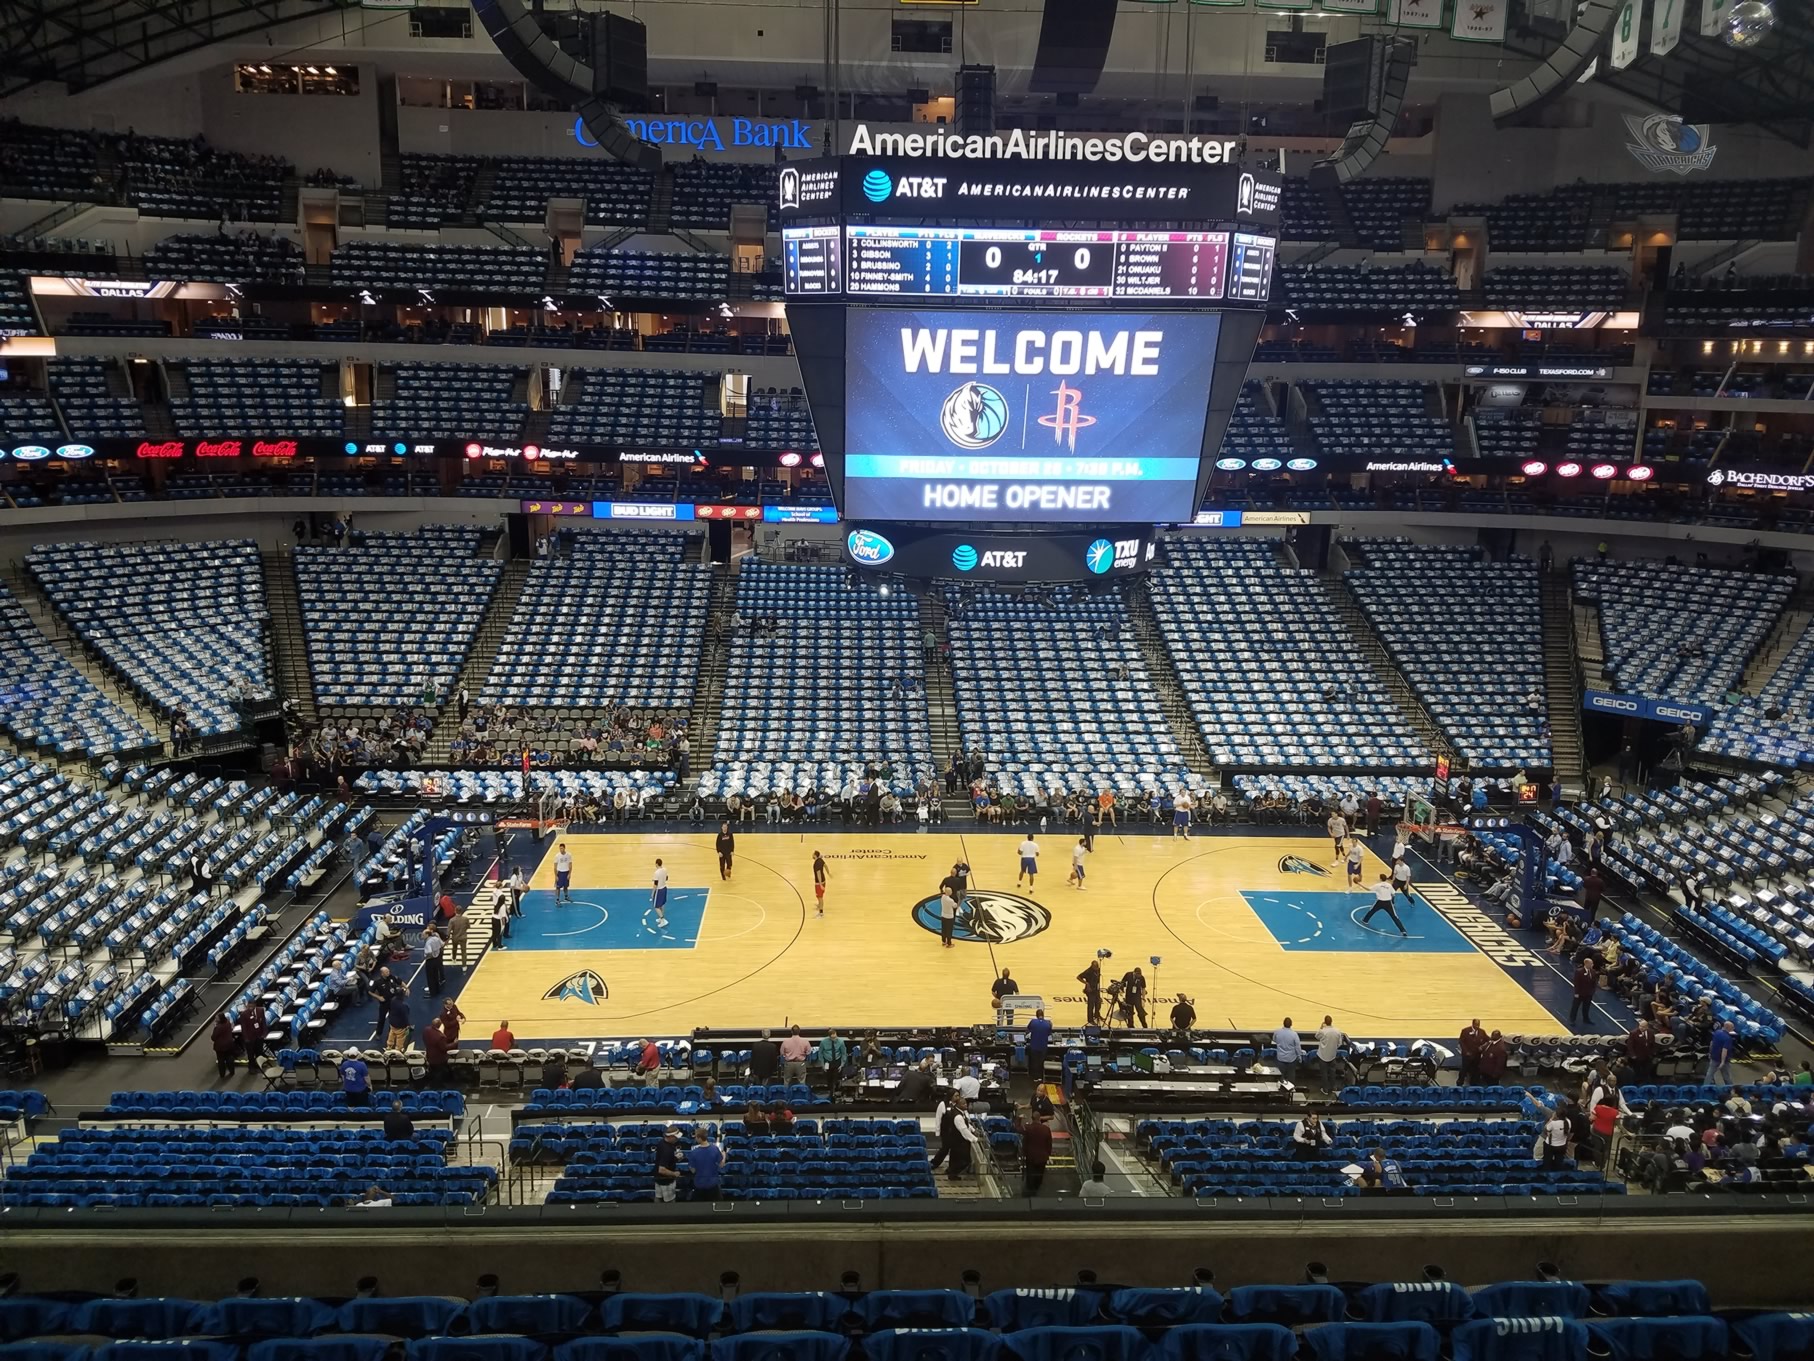 Section 218 at American Airlines Center 